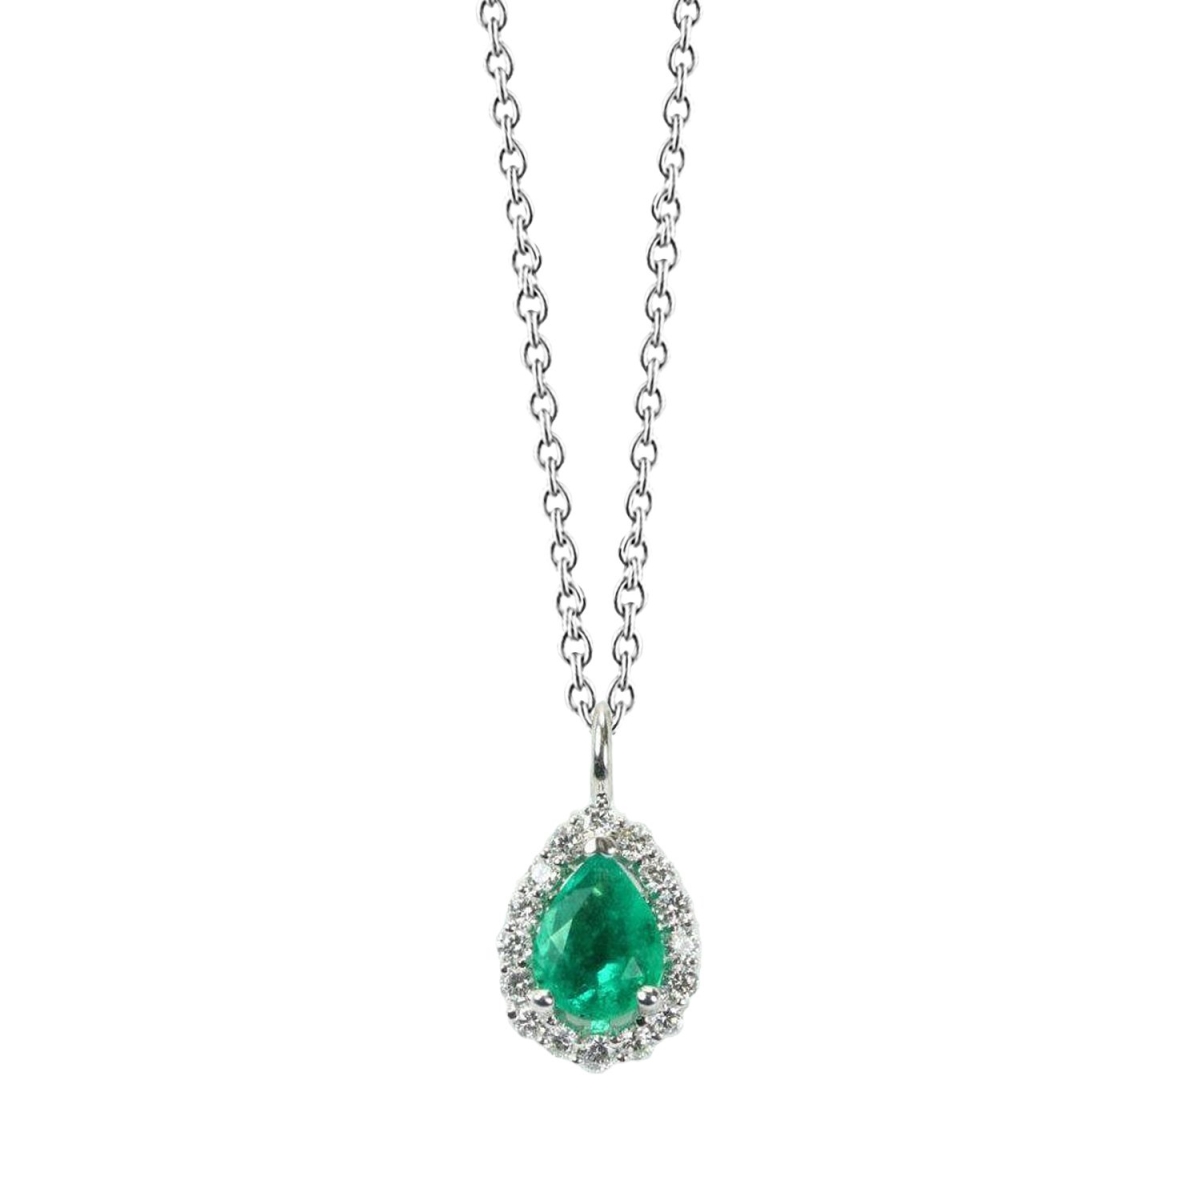 Picture of Harry Chad Enterprises 62408 3.45 CT Emerald & Diamonds Gemstone Pendant Necklace with Chain